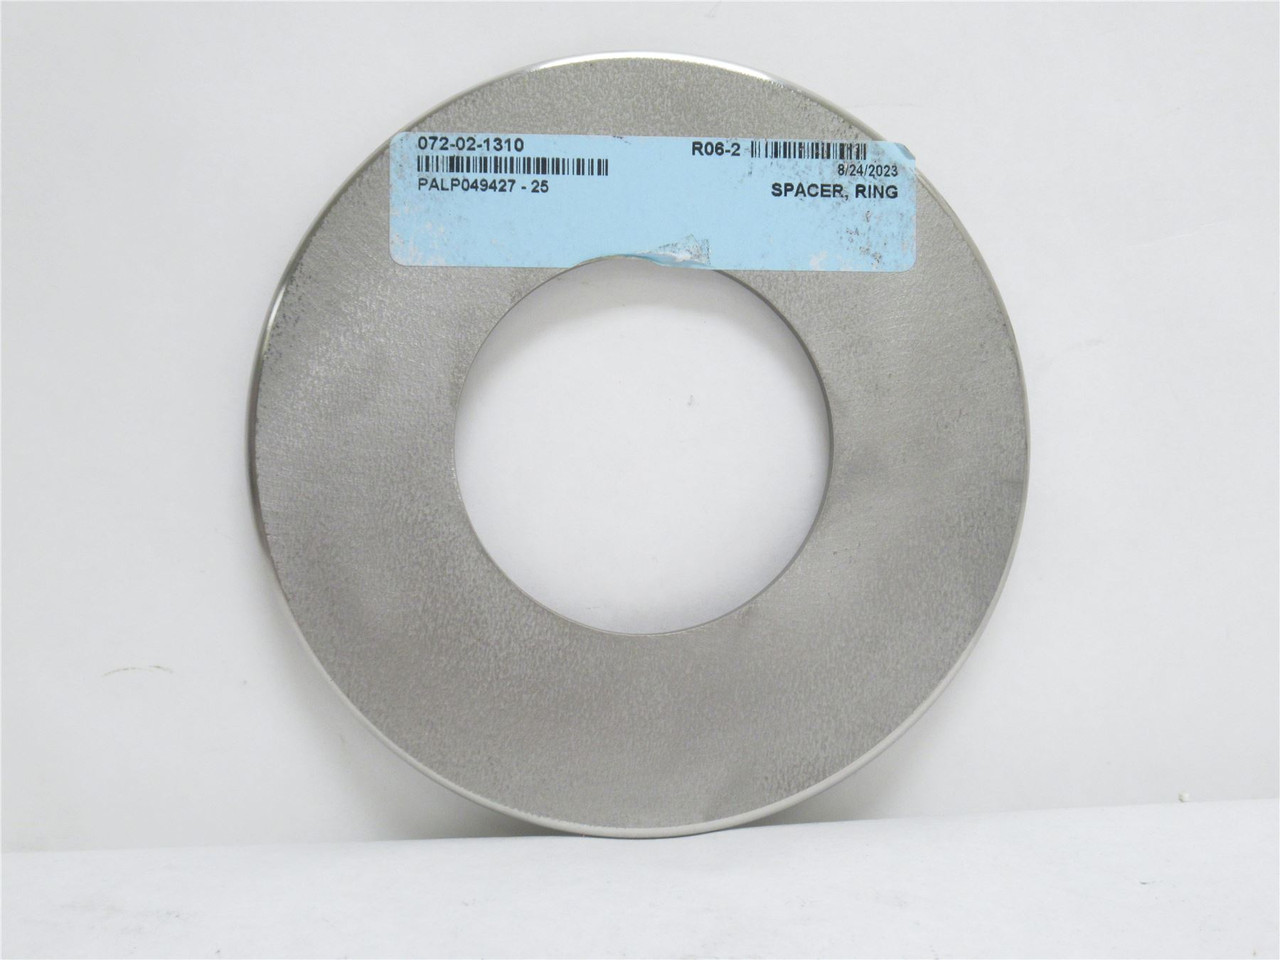 Stein-JBT 072-02-1310; Spacer Ring; SS; 73mmID; W/Out Spacer